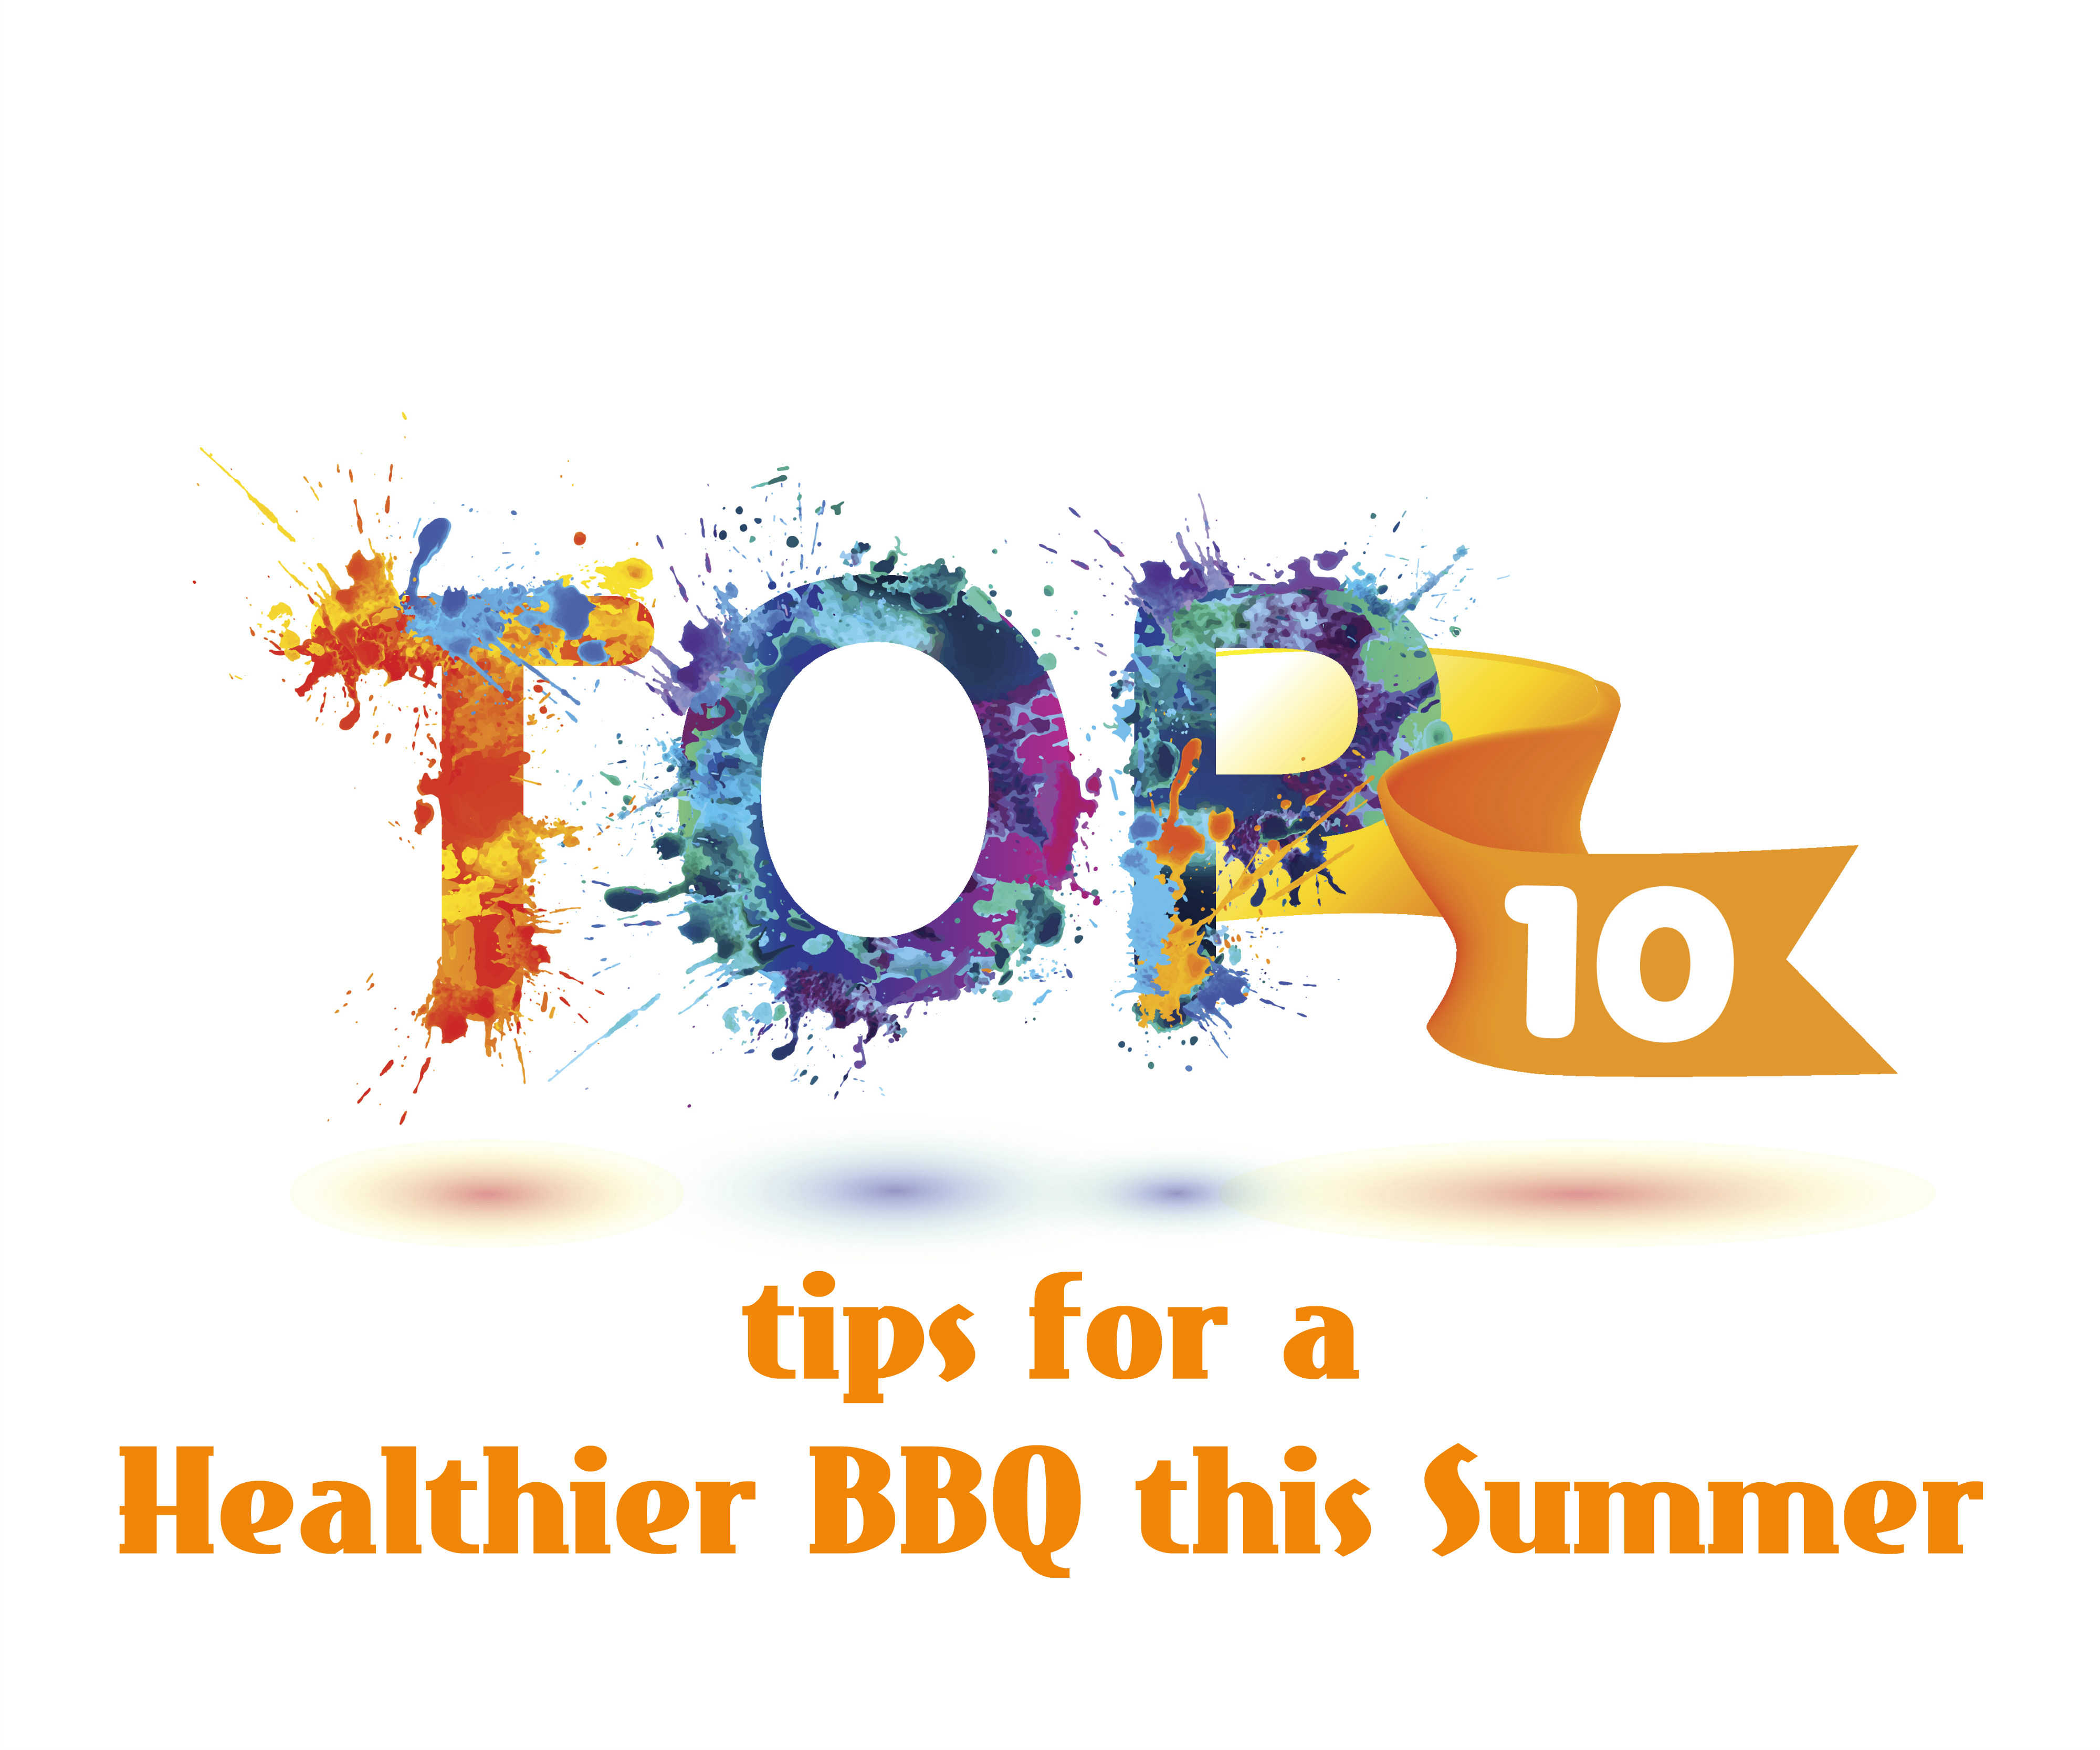 Top Ten Tips for a Healthier BBQ this Summer